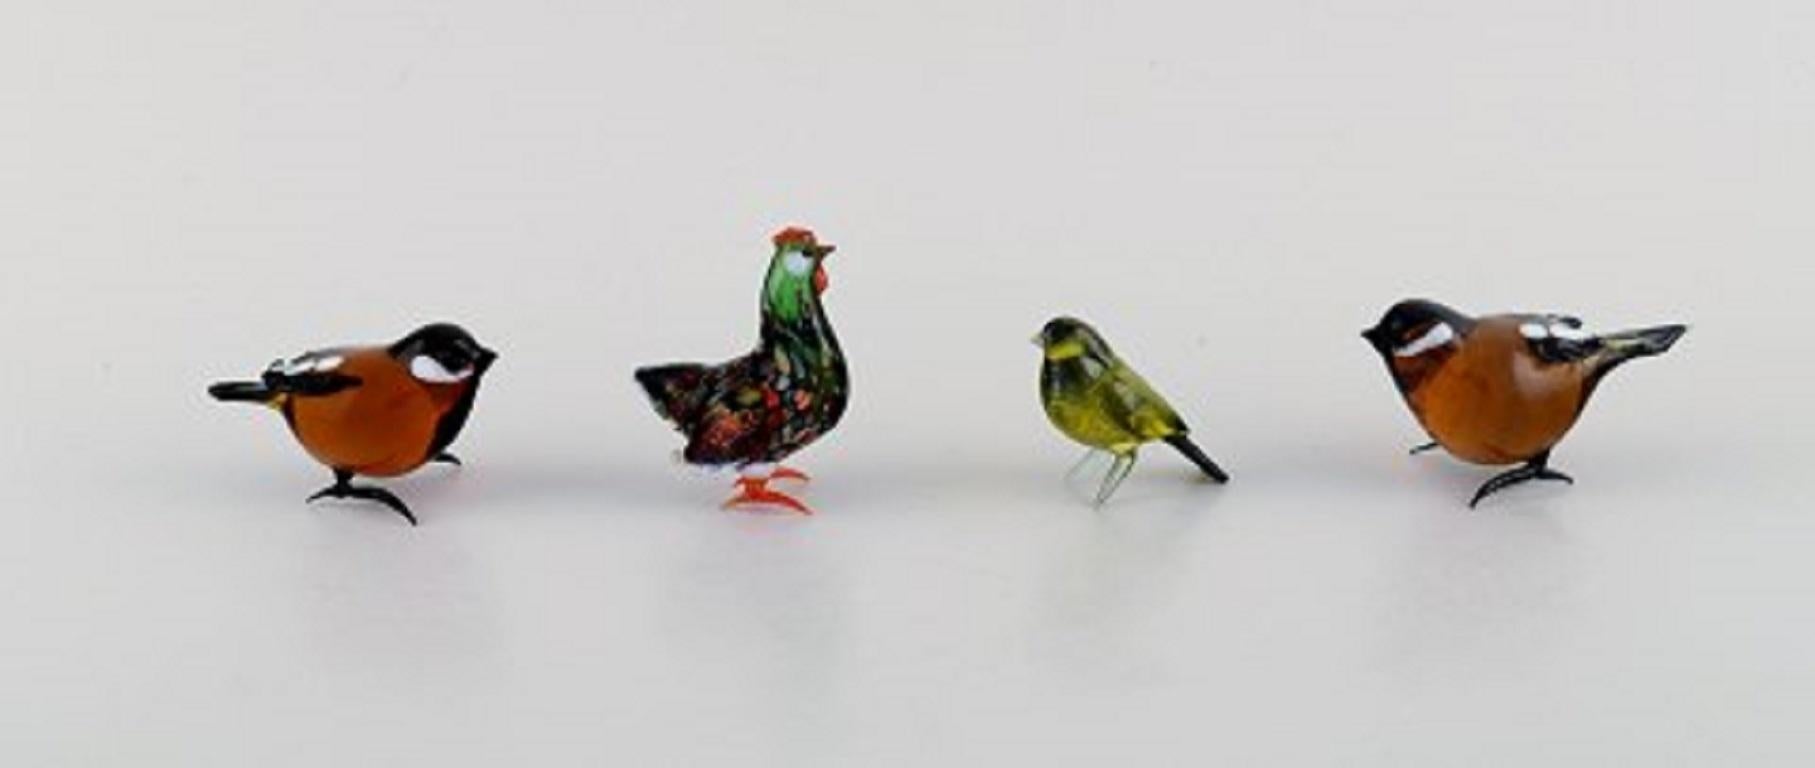 Late 20th Century Swedish Art Glass, 11 Miniature Figures in the Form of Birds, 1970s-1980s For Sale